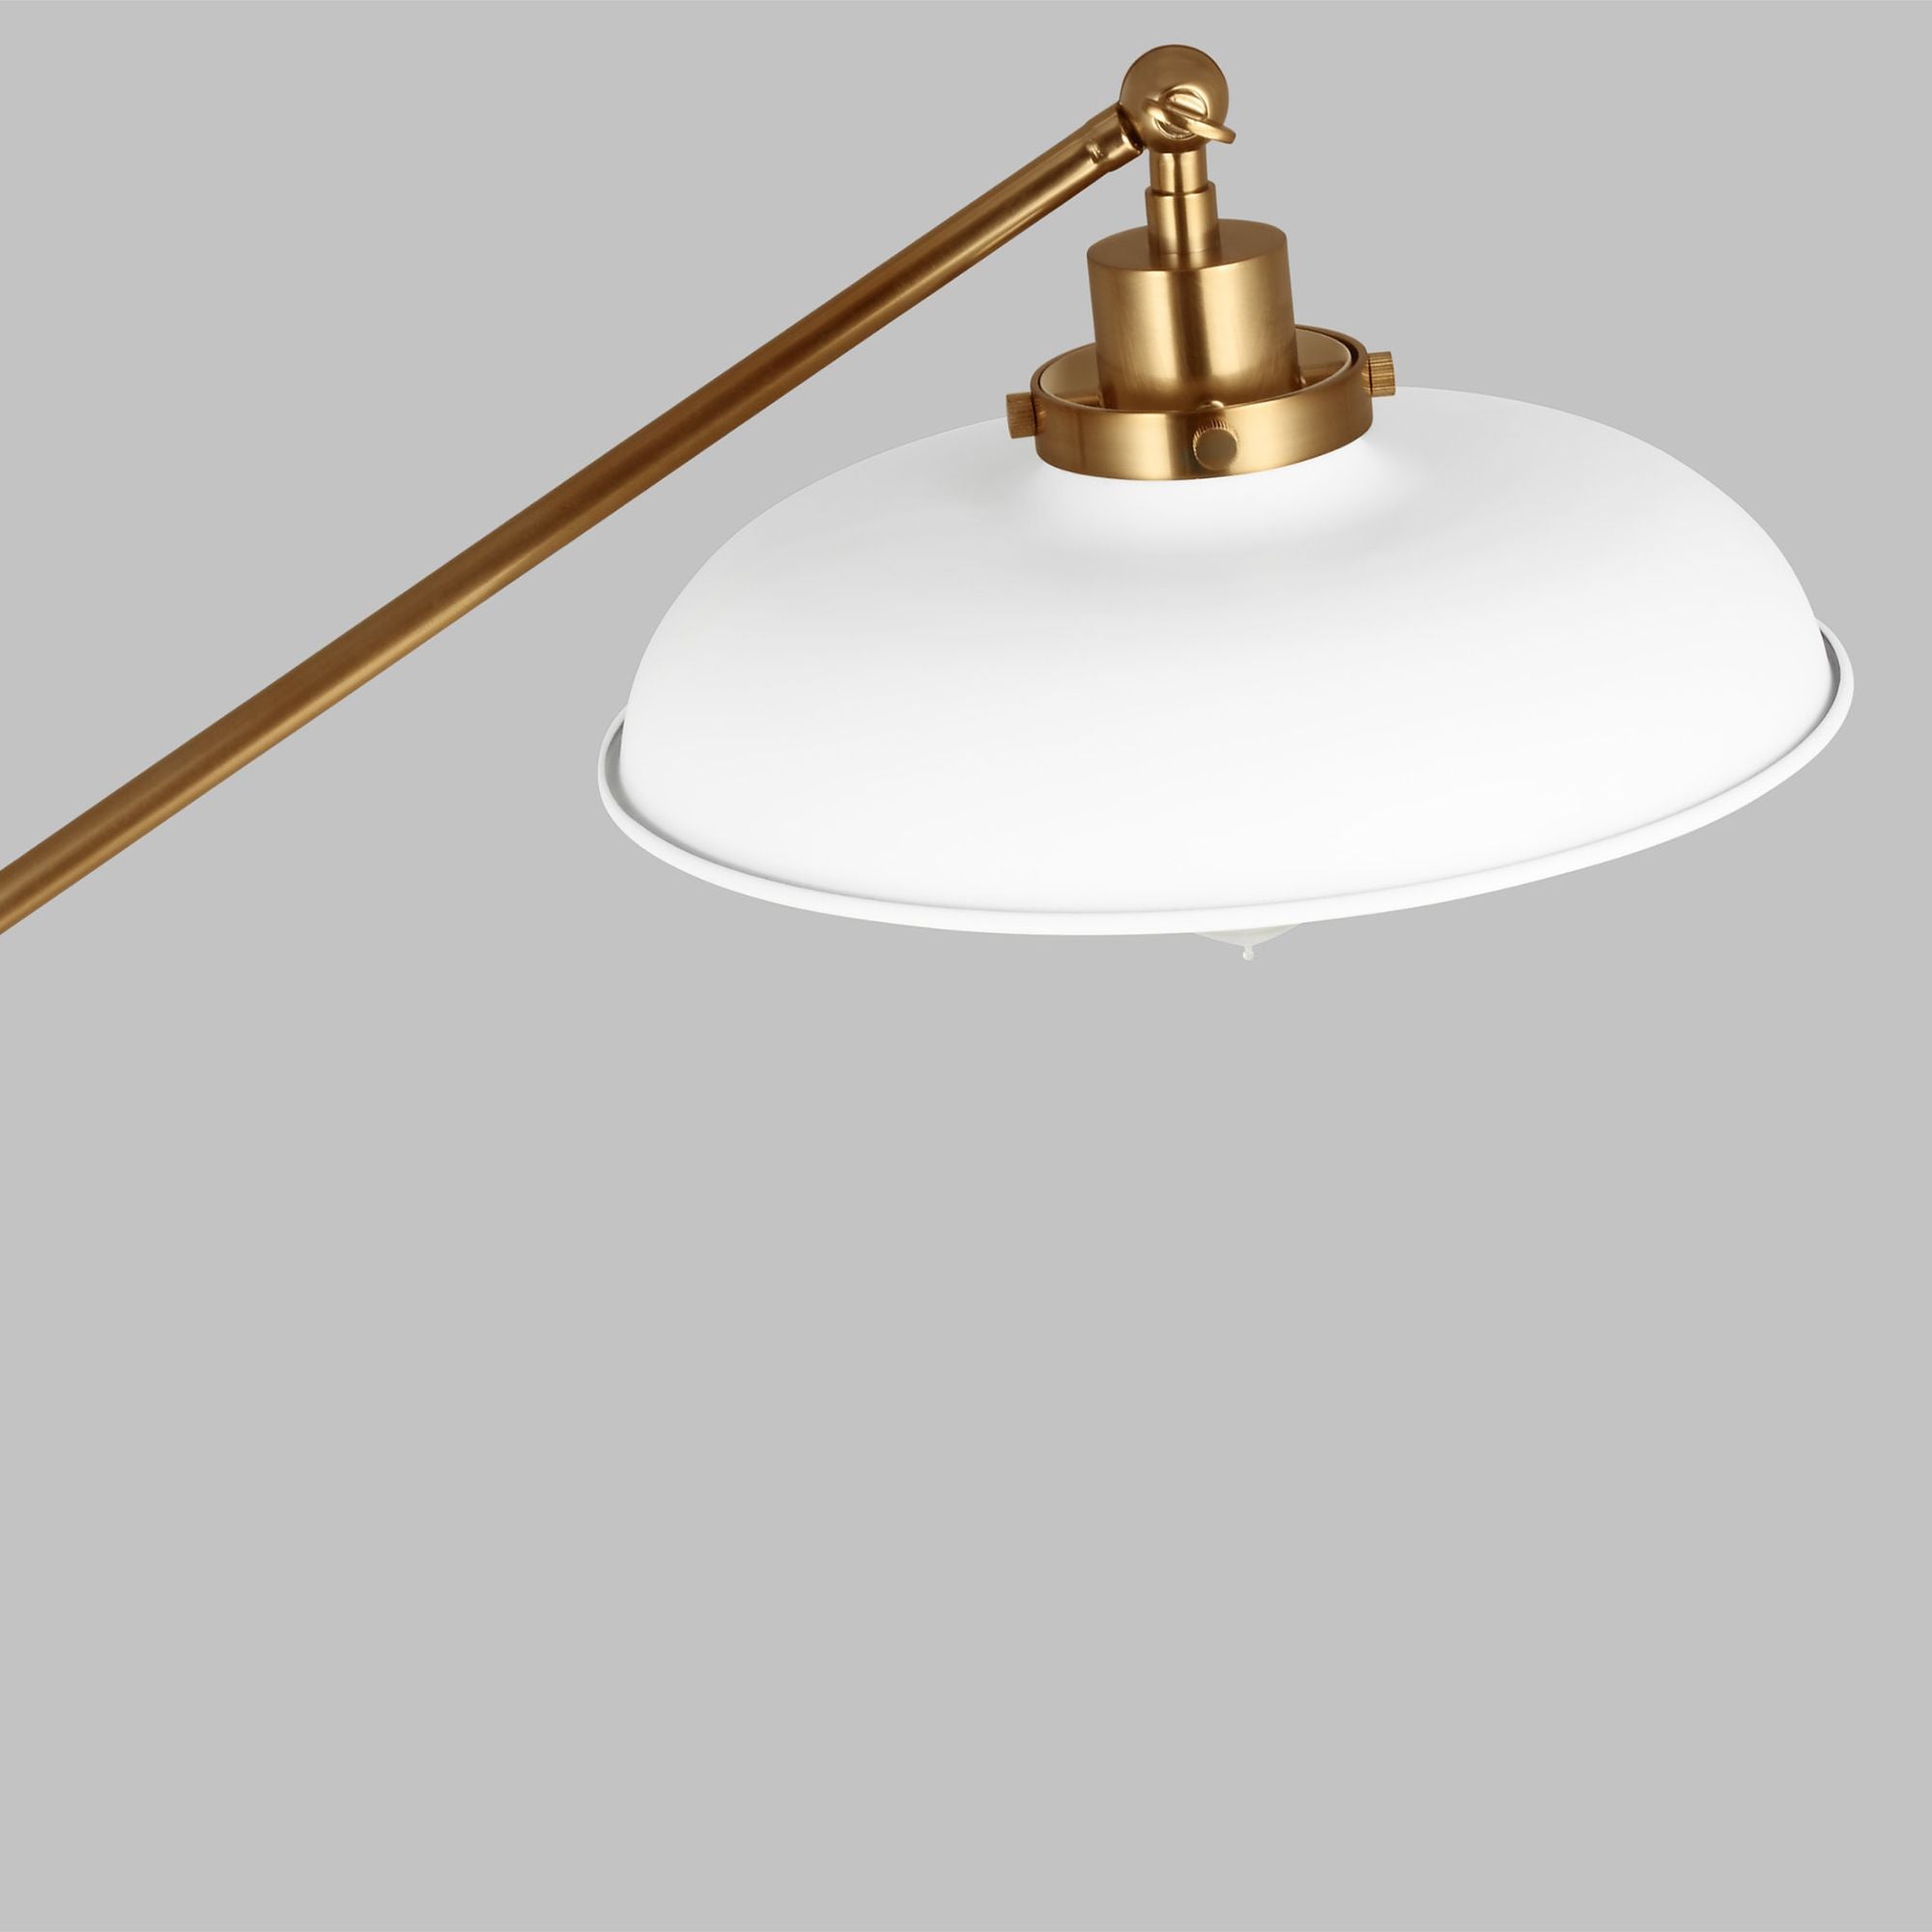 Chapman & Myers Wellfleet Wide Floor Lamp in Matte White and Burnished Brass